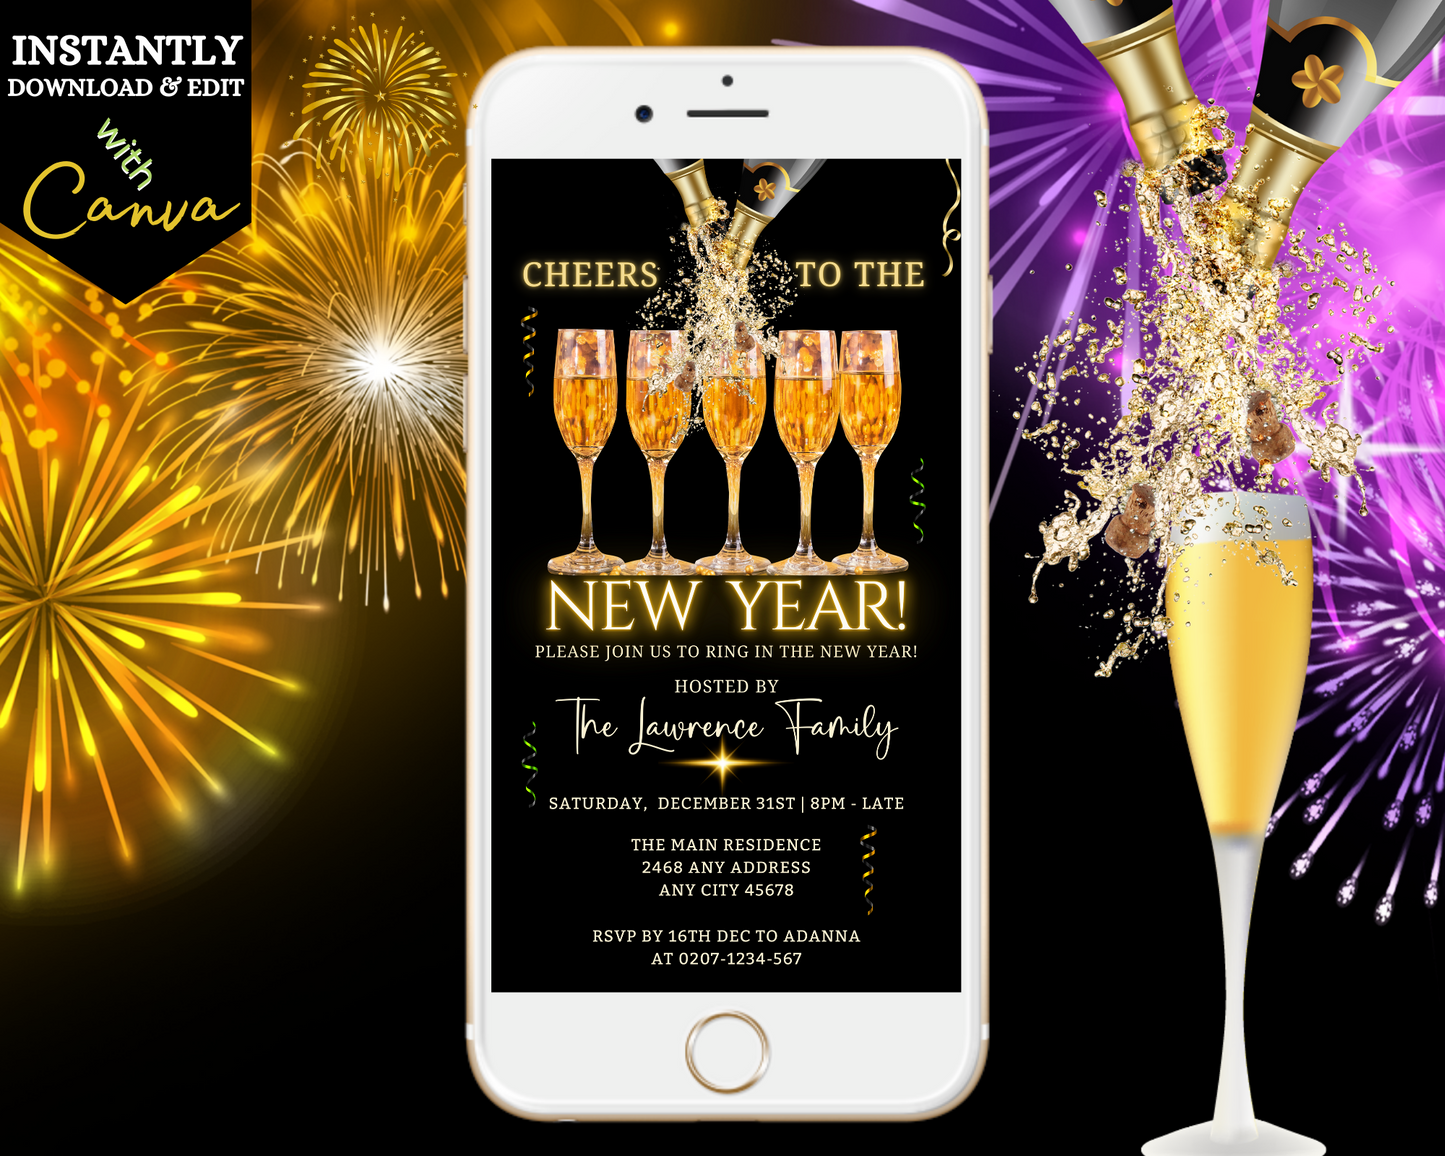 Splashing Champagne Neon Cheers NY Party Evite showing a smartphone screen with fireworks and champagne glasses, customizable via Canva for digital invitations.